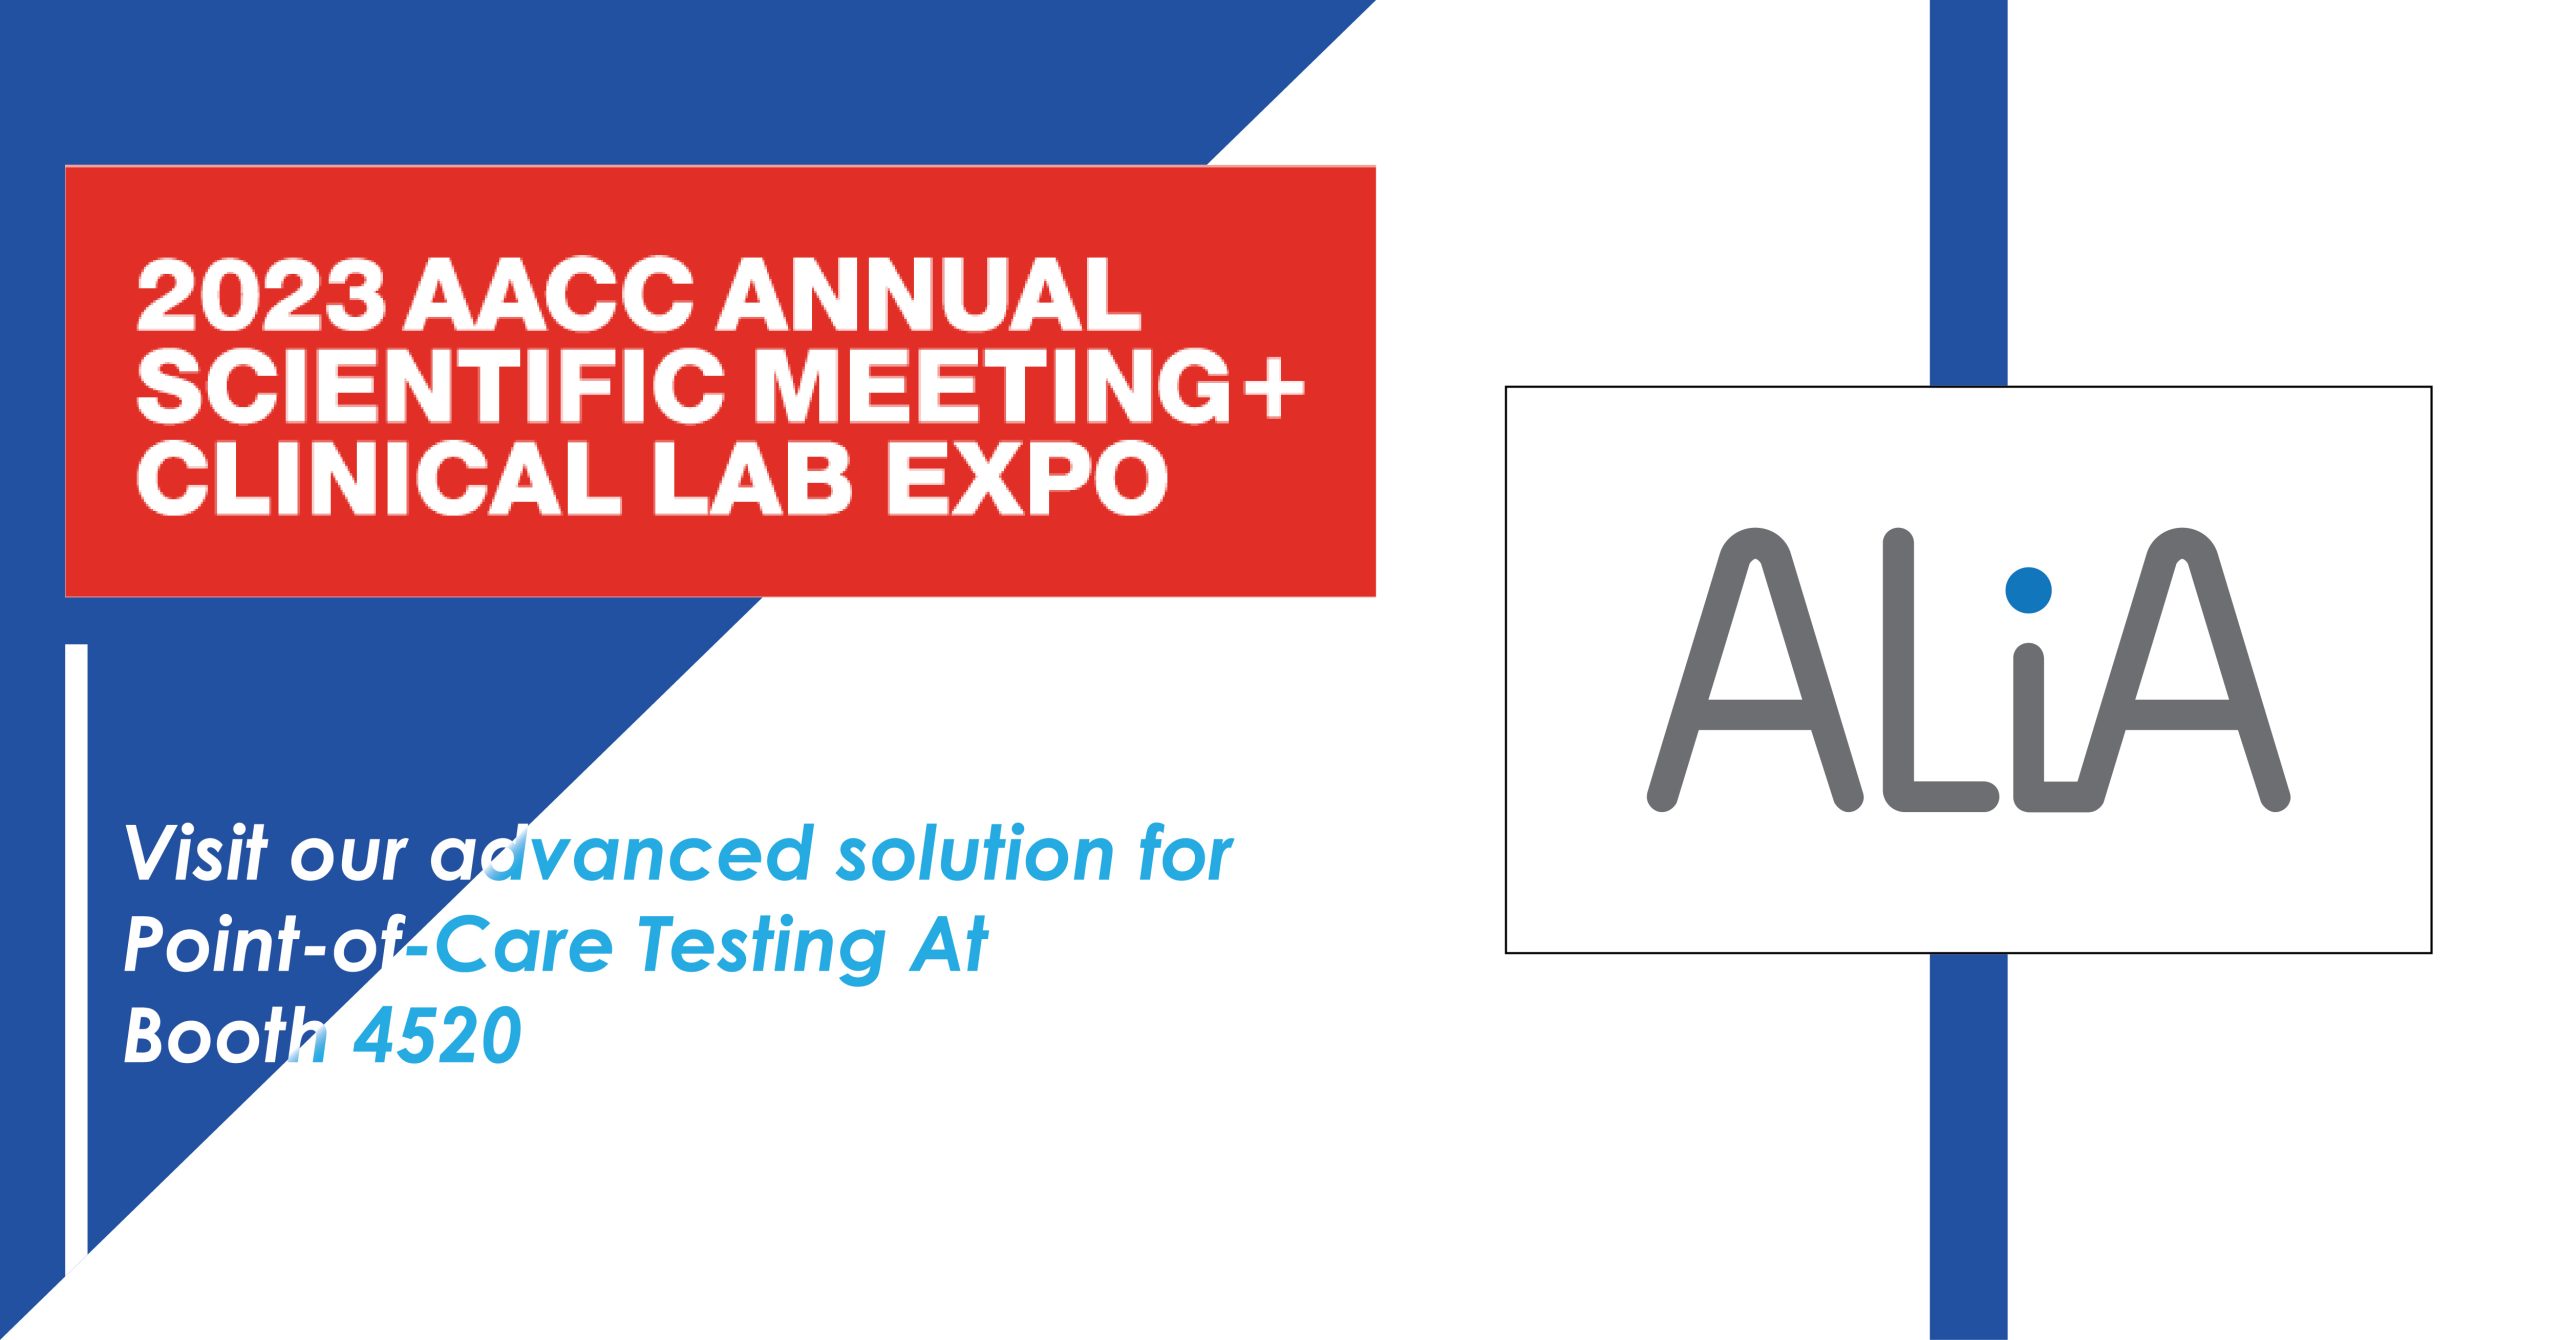 We will showcase our ALiA Platform at AACC Clinical Expo